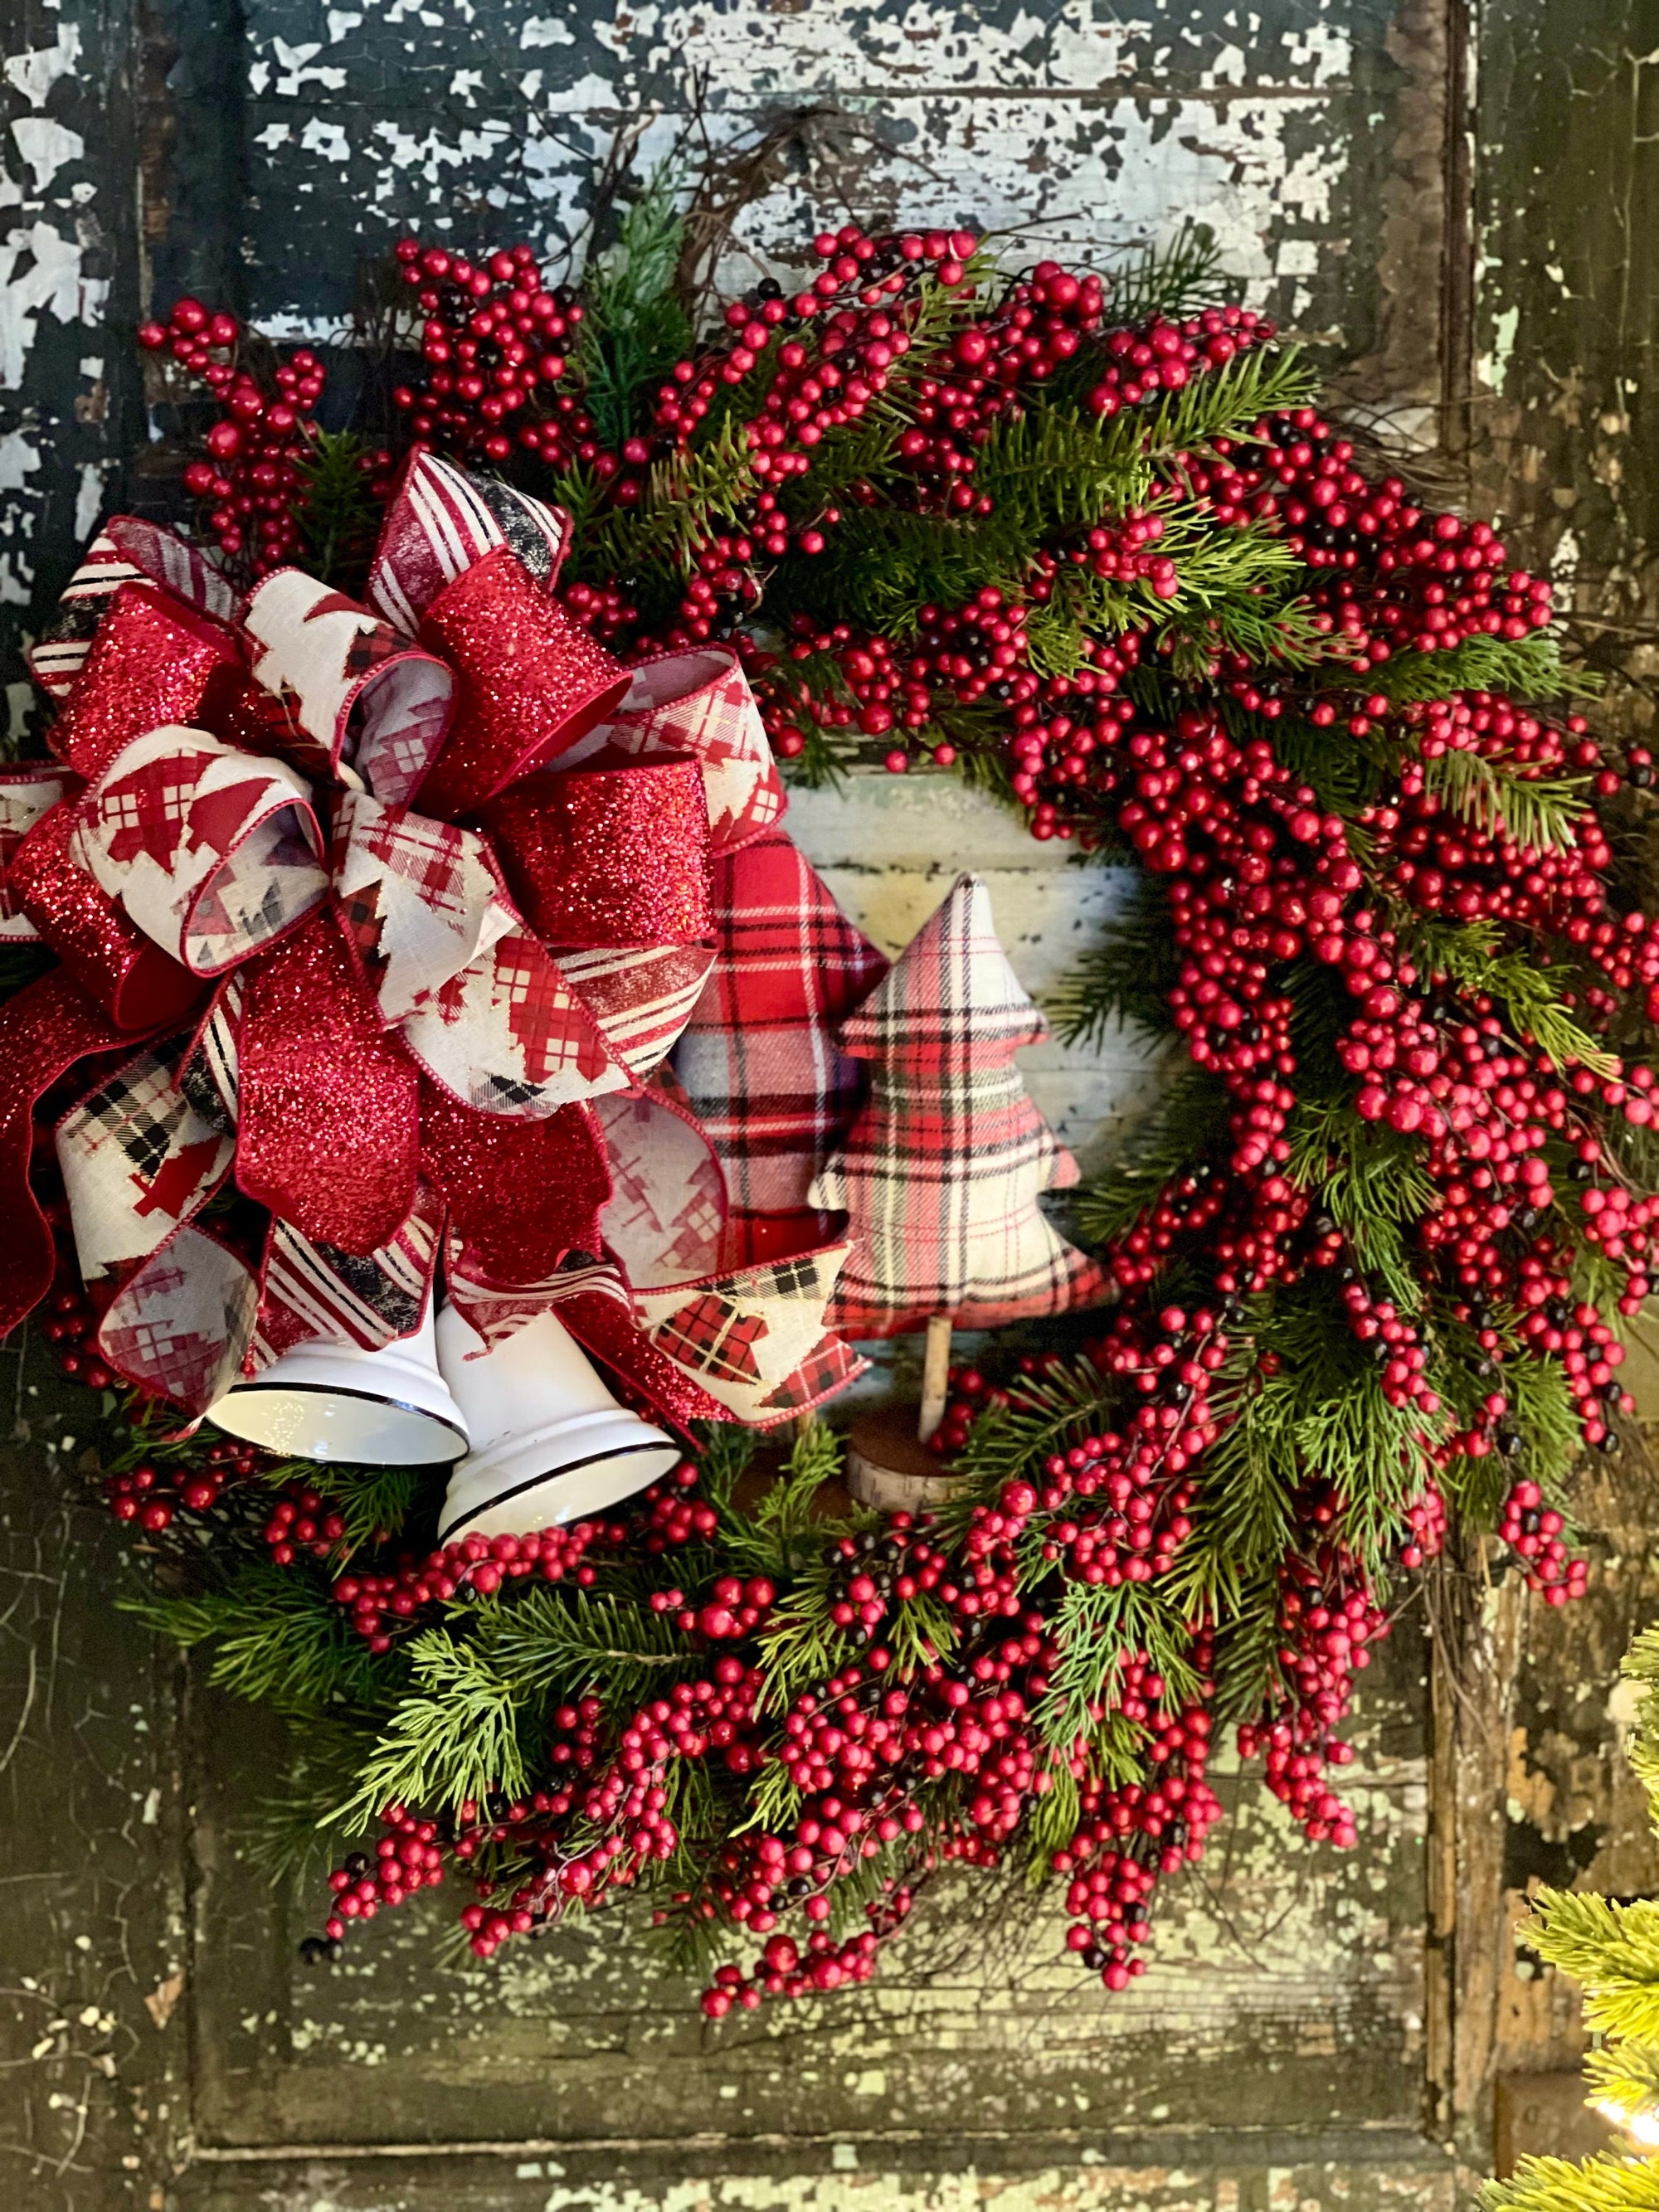 Red and White Wreath